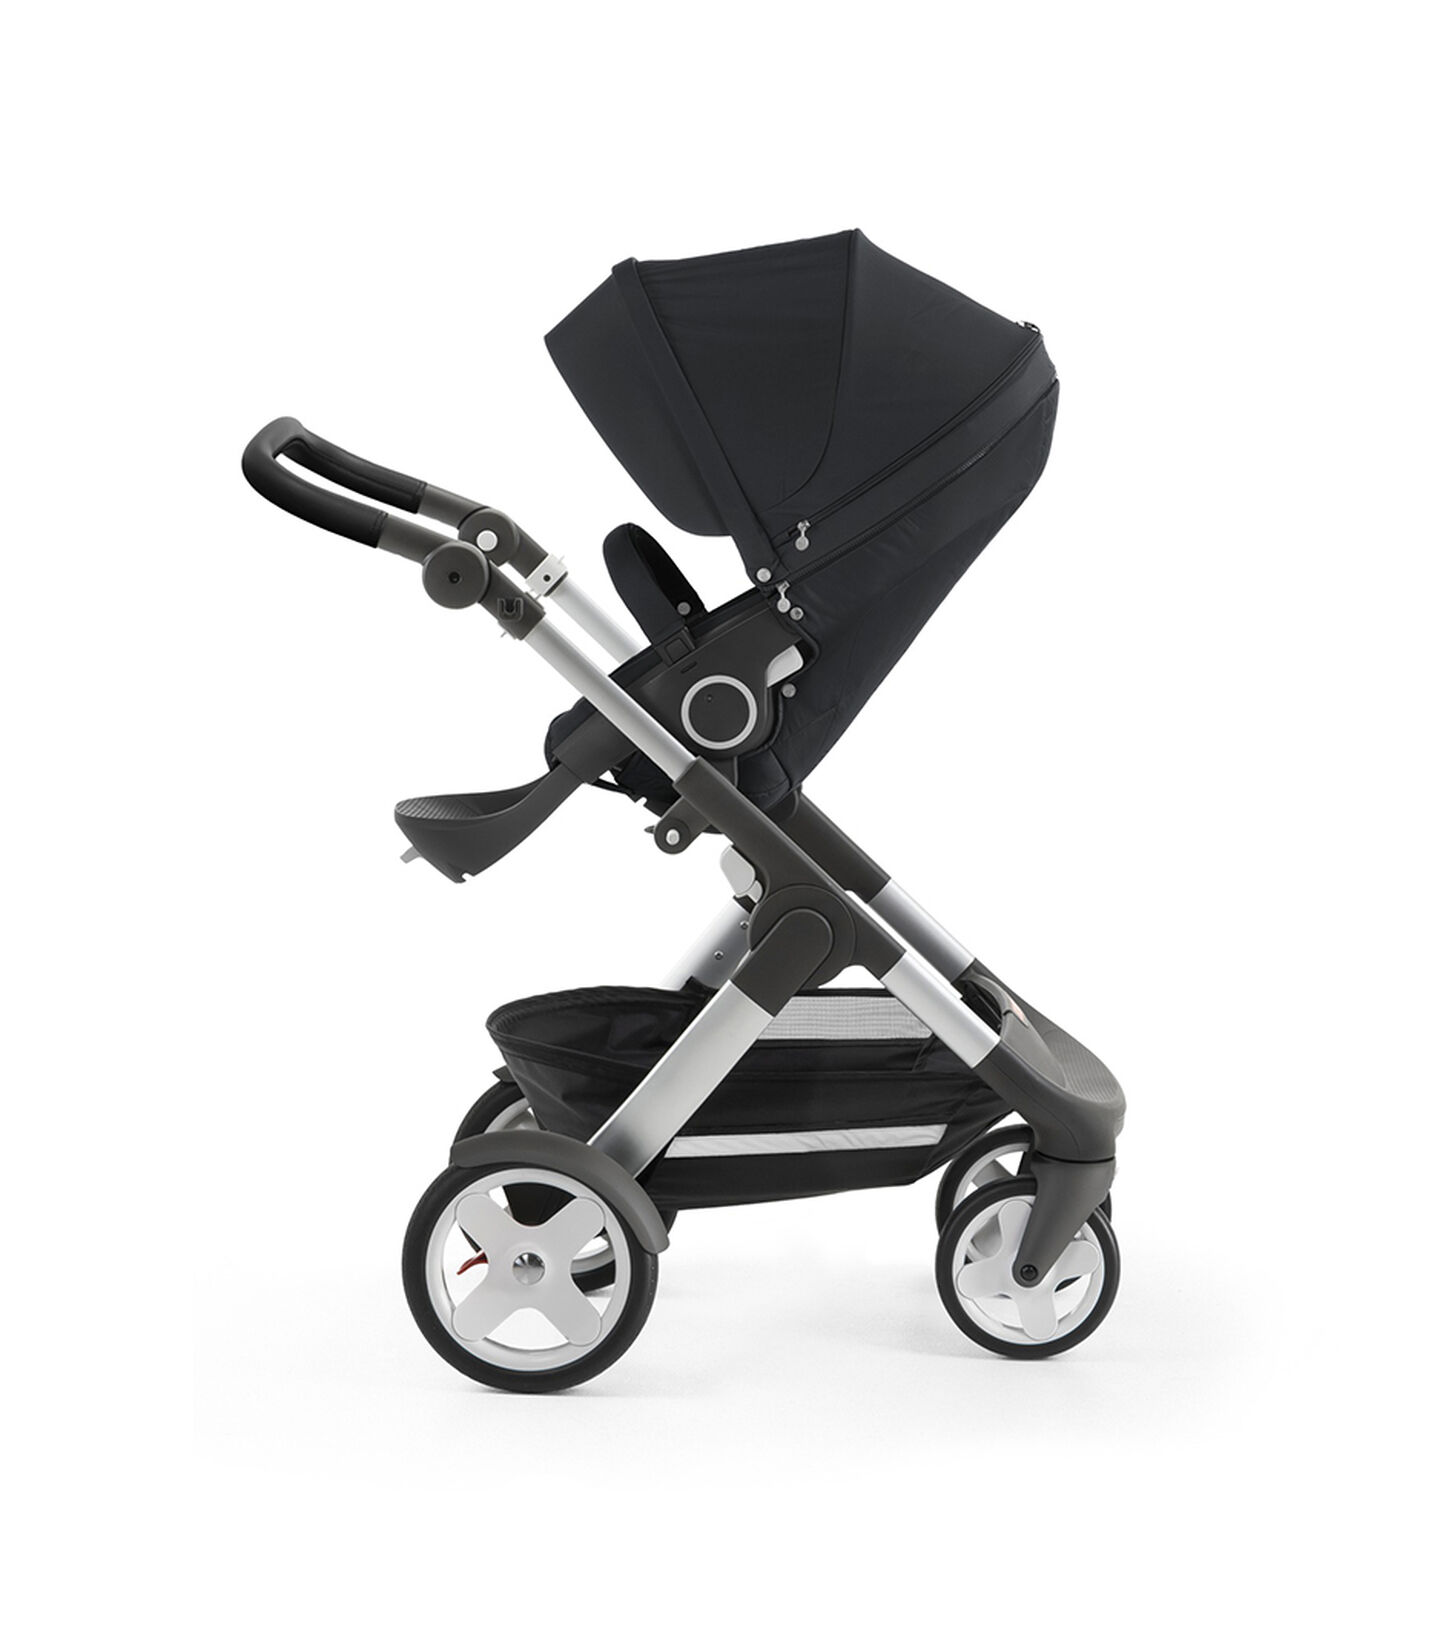 Stokke® Trailz™ with silver chassis and Stokke® Stroller Seat, Black Melange. Classic Wheels. view 1